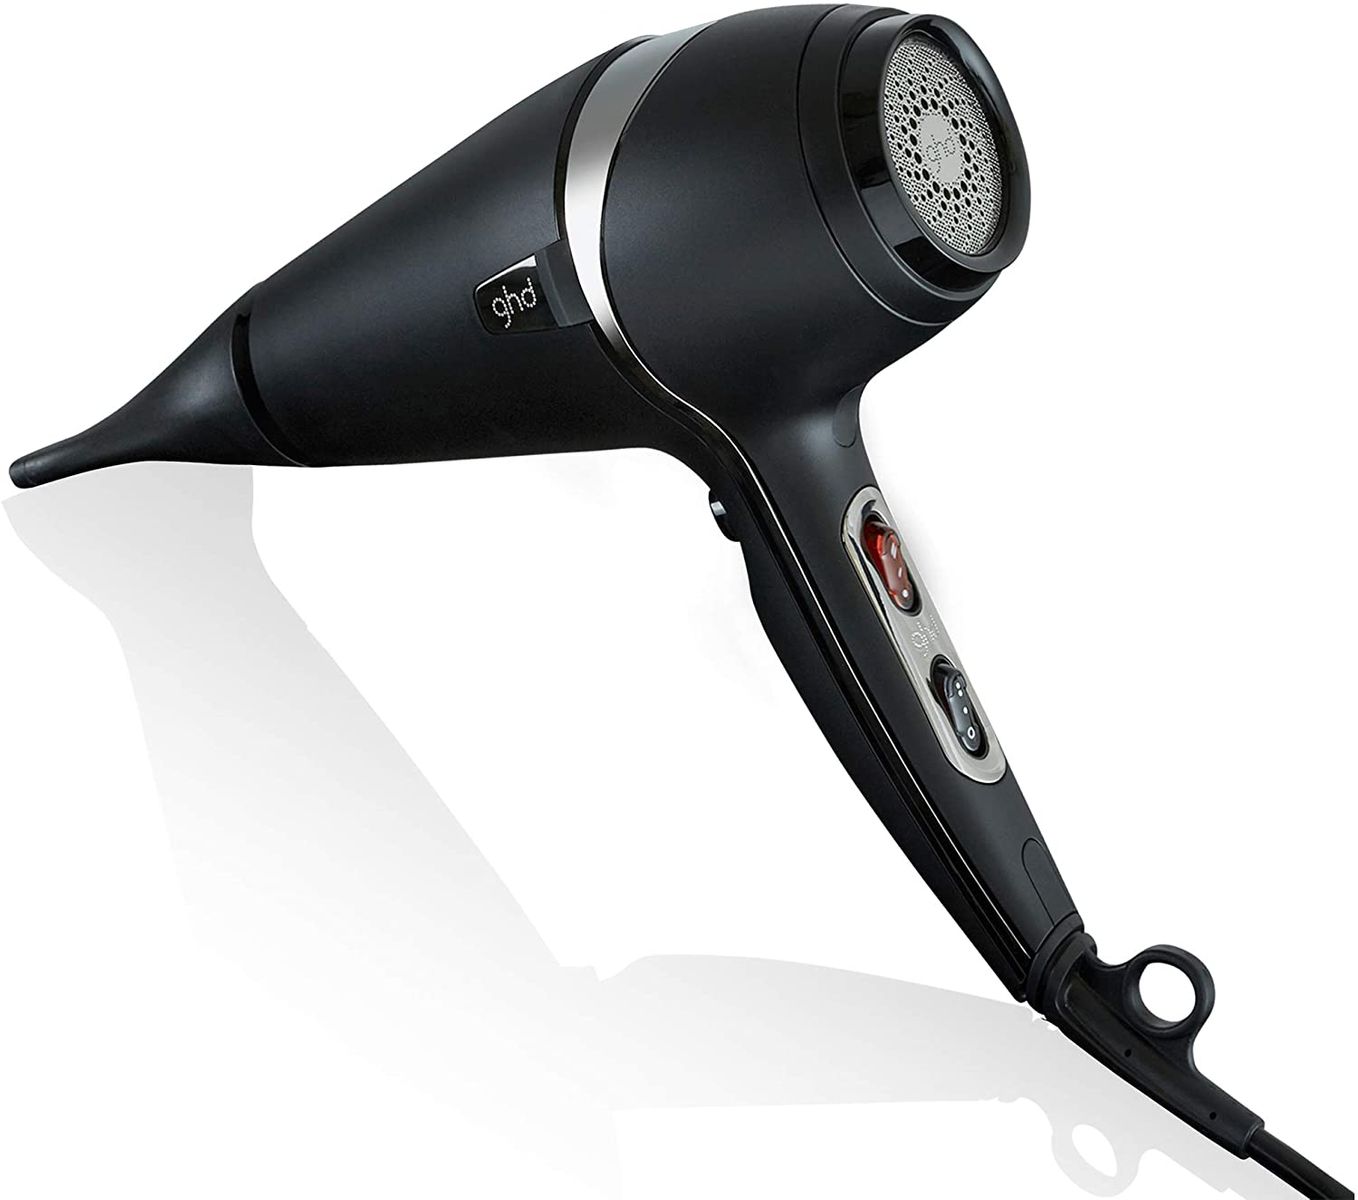 Ghd Air - Professional Hair Dryer, Finish as fresh out of the salon in half the time Black / Silver